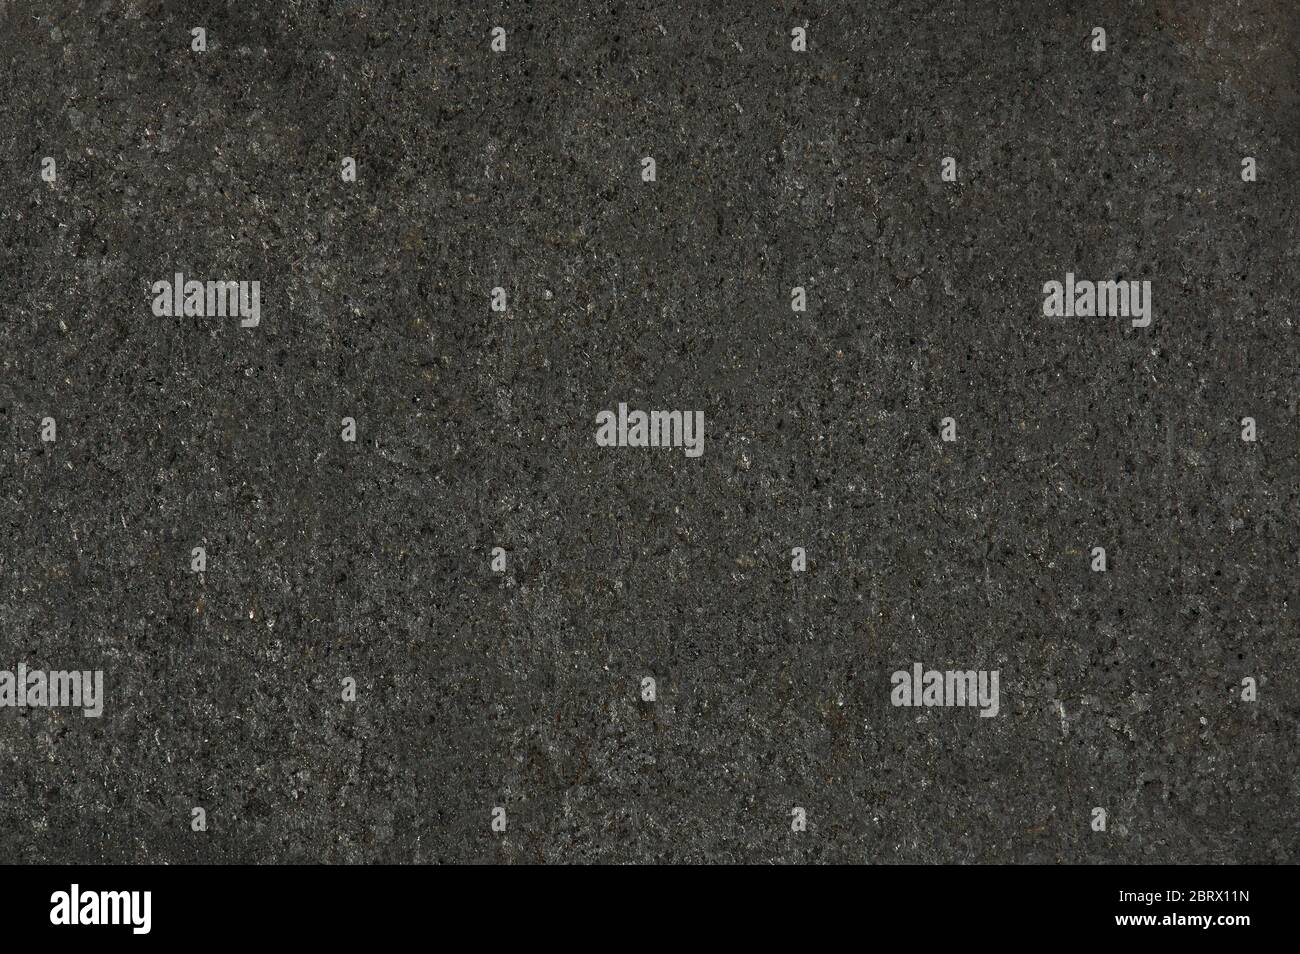 Dark gray metallic surface with black spots close up view Stock Photo